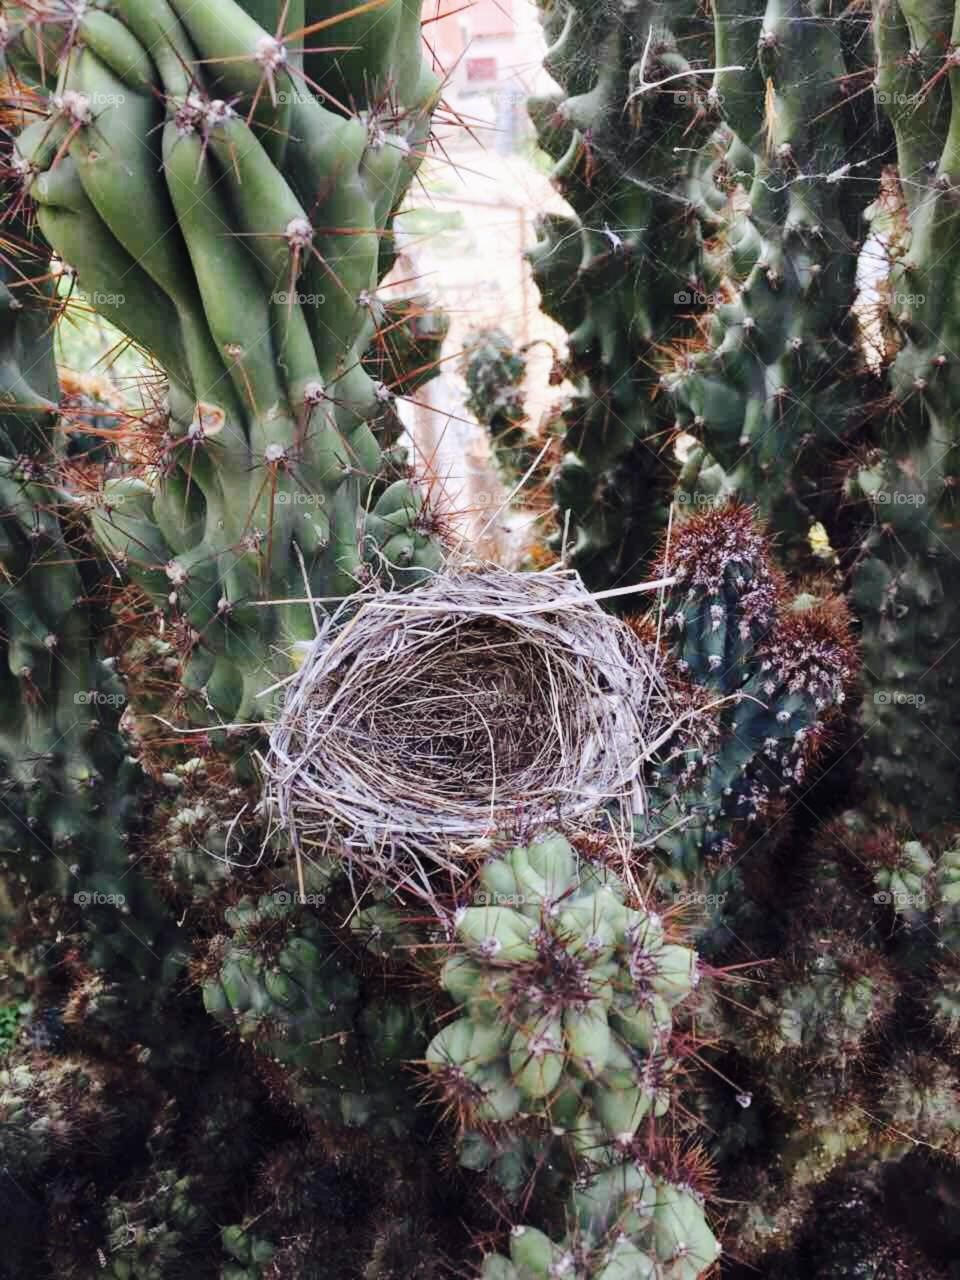 A nest in a cactus